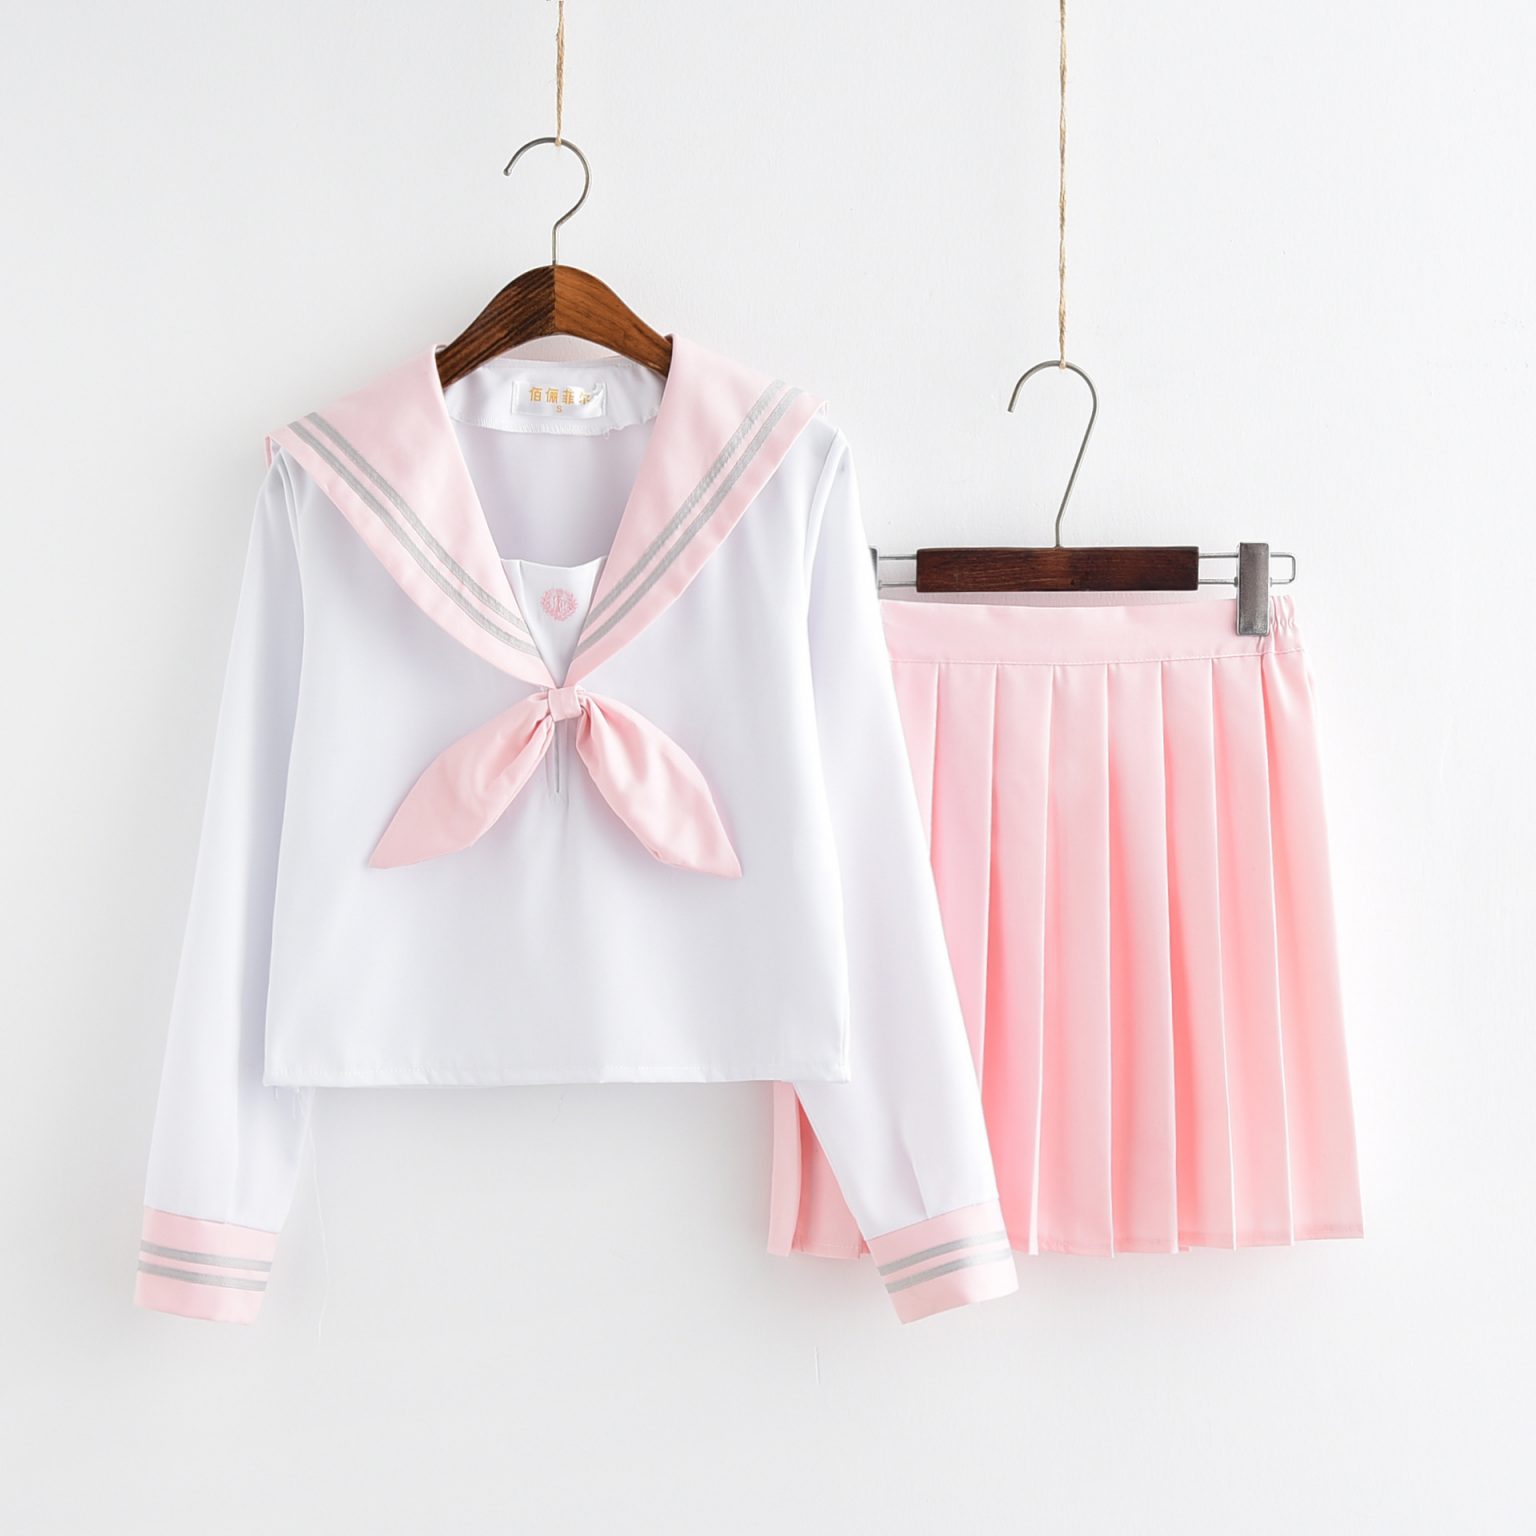 Japanese School Uniform For Girls Sailor Pink Mint Style Students ...